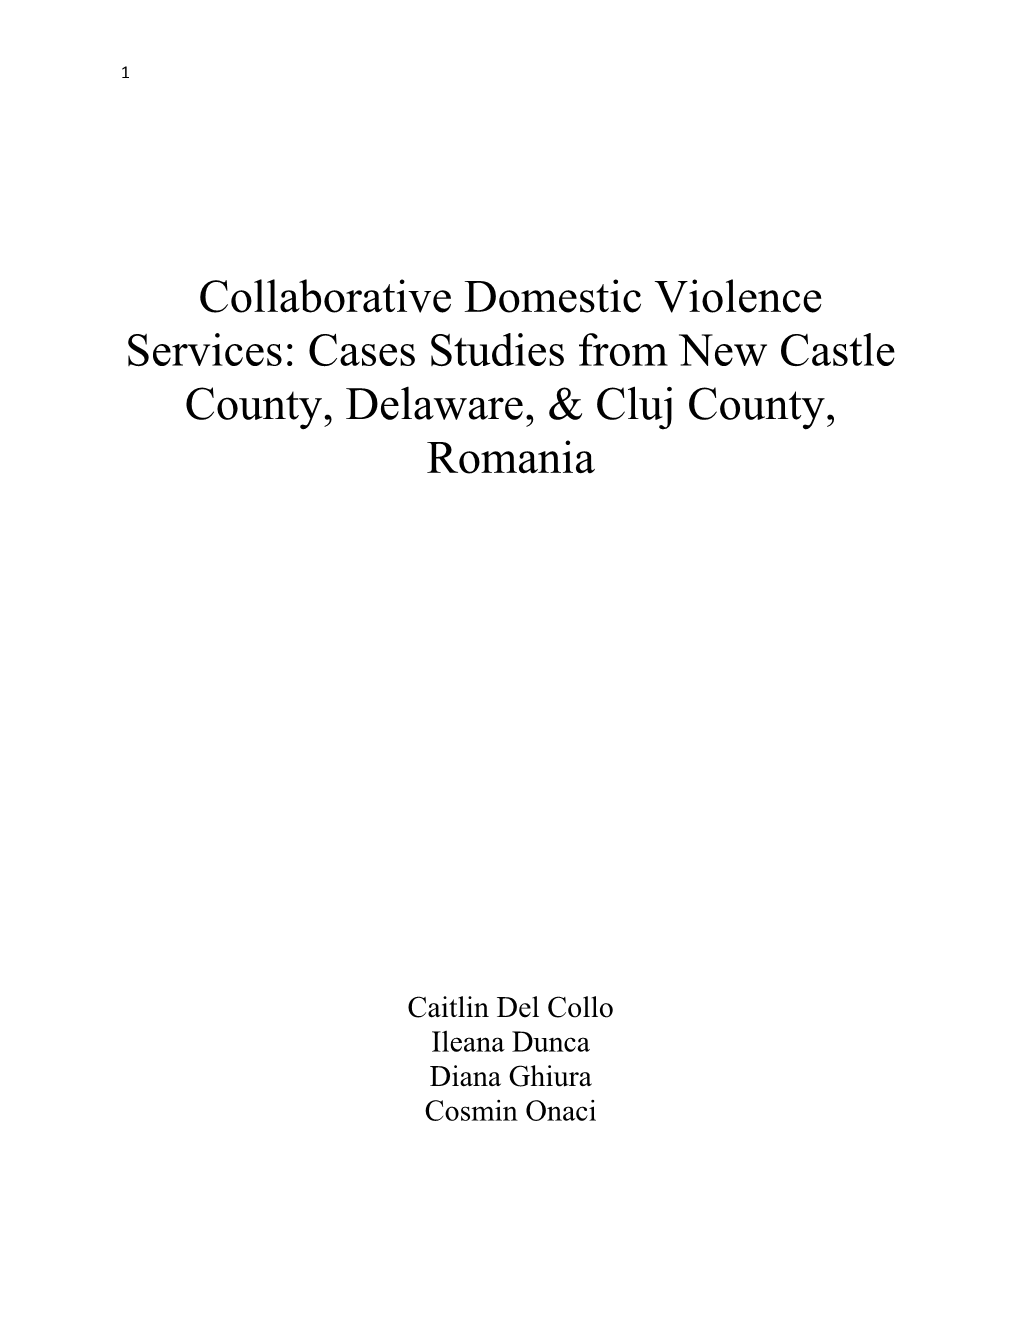 Collaborative Domestic Violence Services: Cases Studies from New Castle County, Delaware